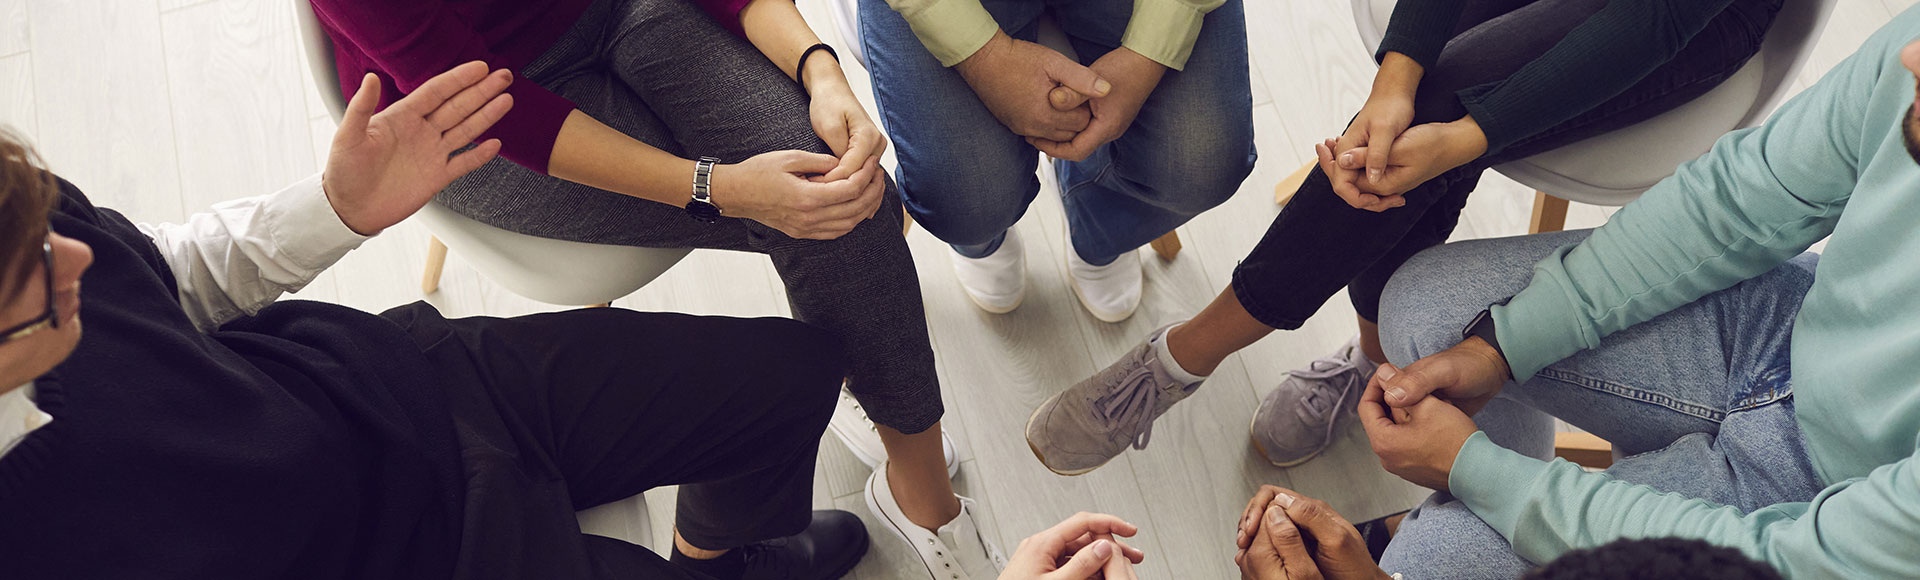 Benefits of Attending Support Groups